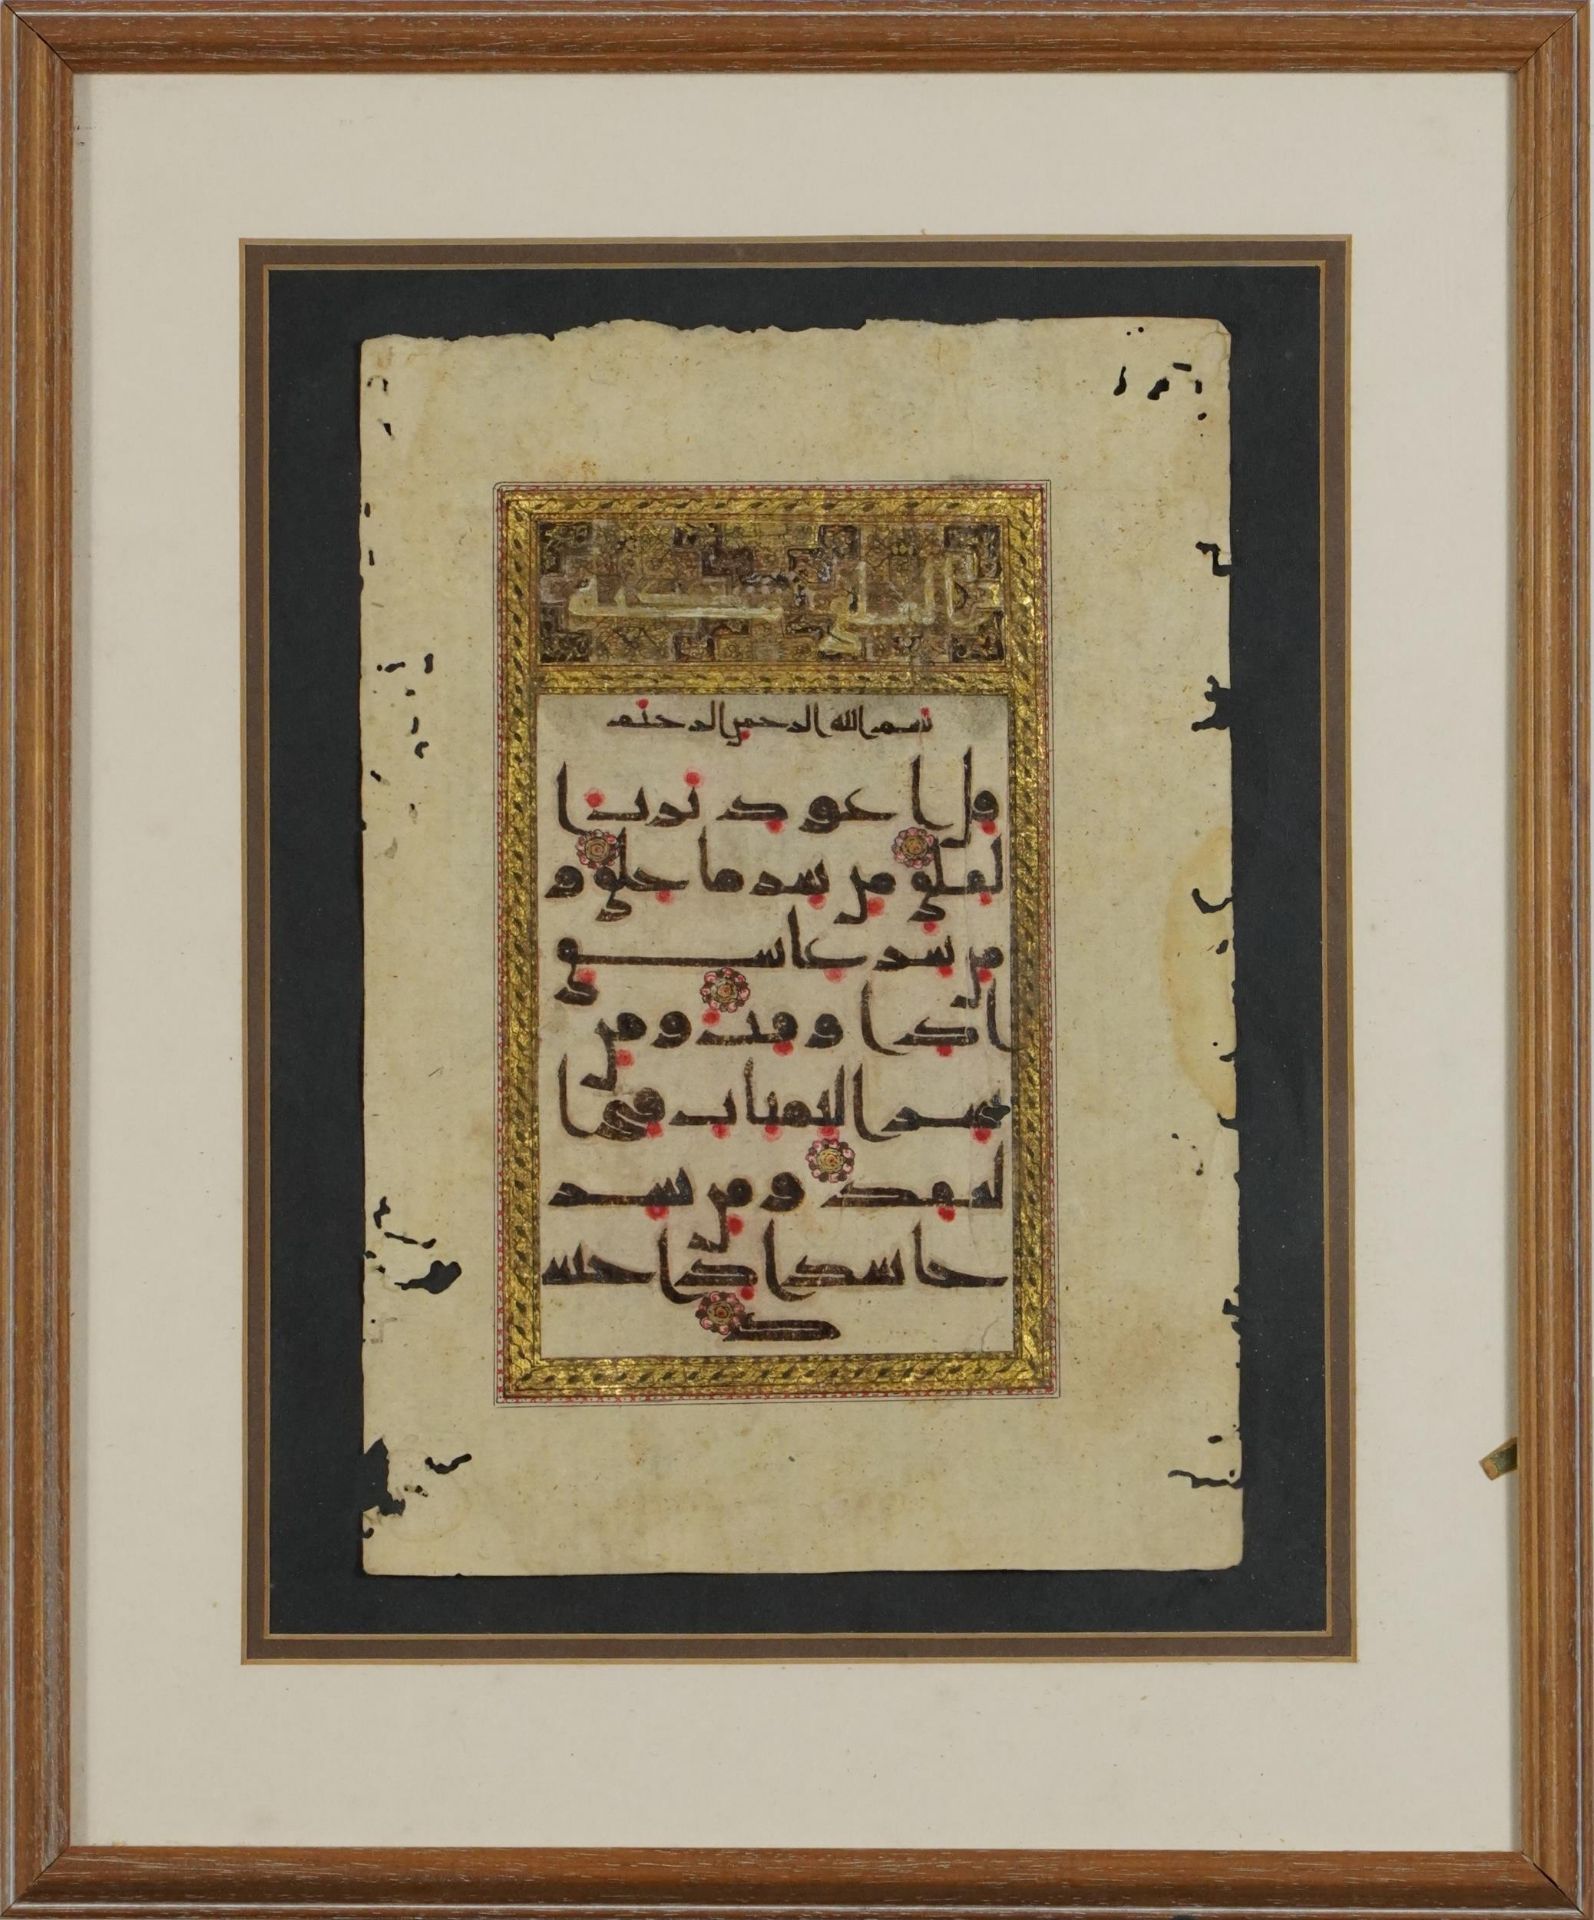 Antique Islamic illuminated Quran page hand painted with calligraphy, mounted, framed and glazed, - Image 2 of 3